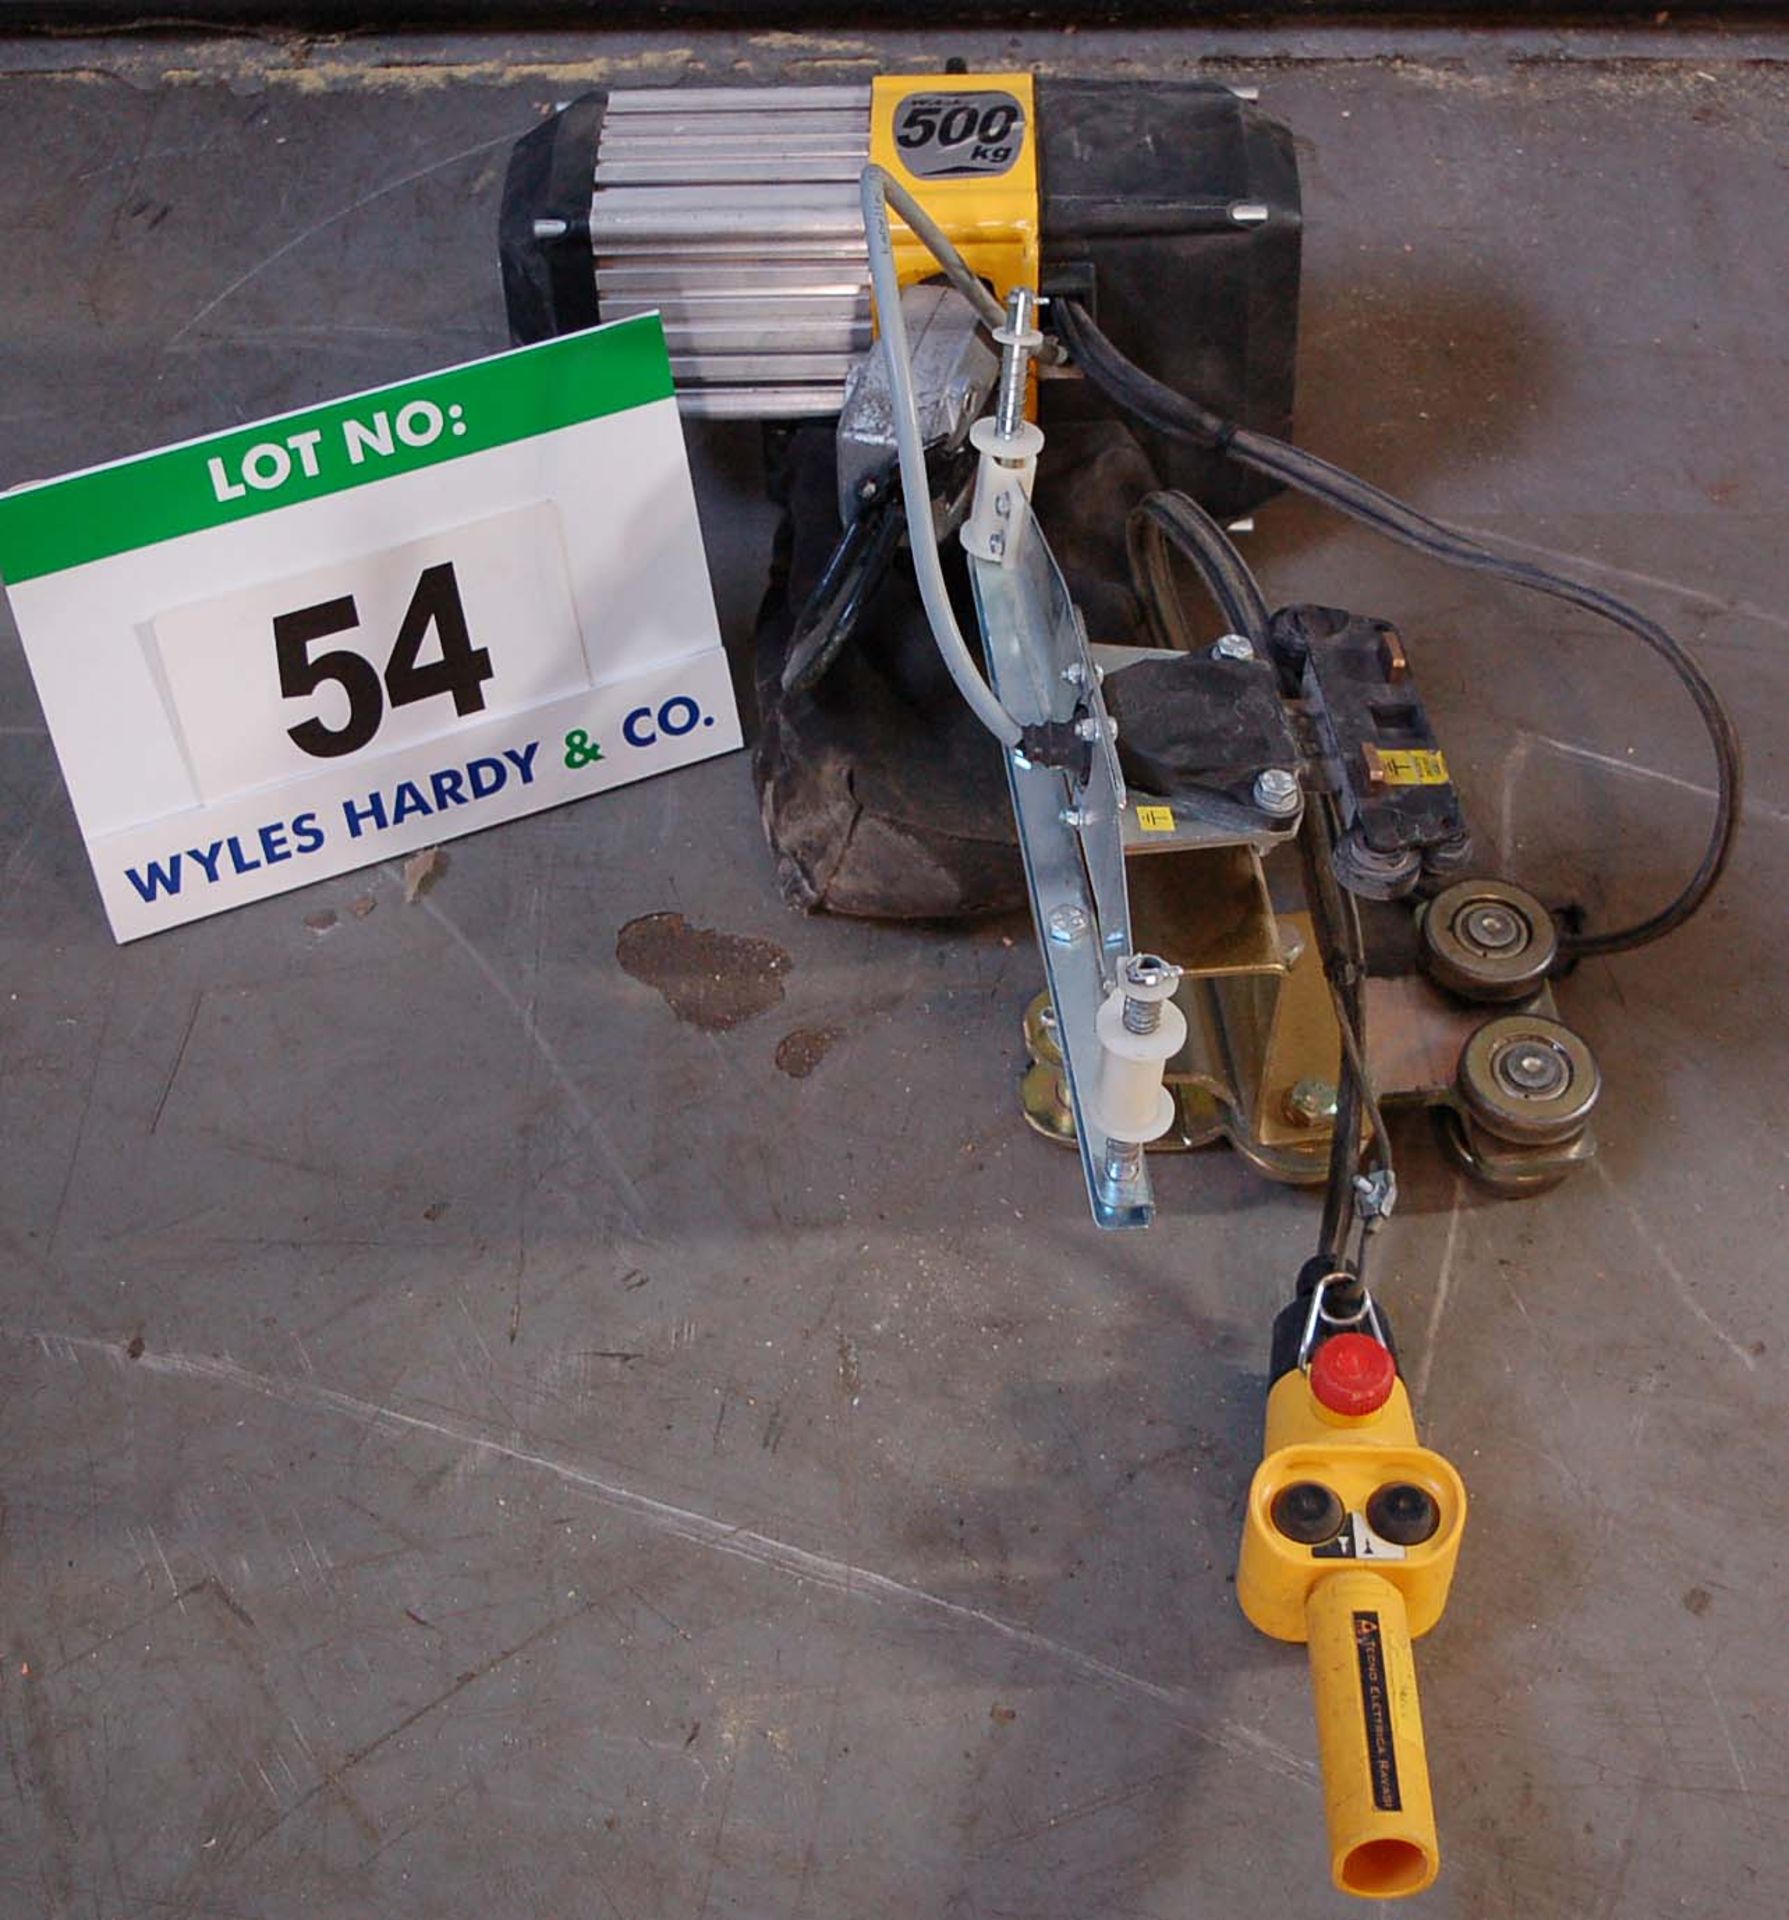 A YALE CPVF 2-8 500Kg capacity Electric Chain Hoist with Hand Held Umbilical Control and Overhead - Image 2 of 4